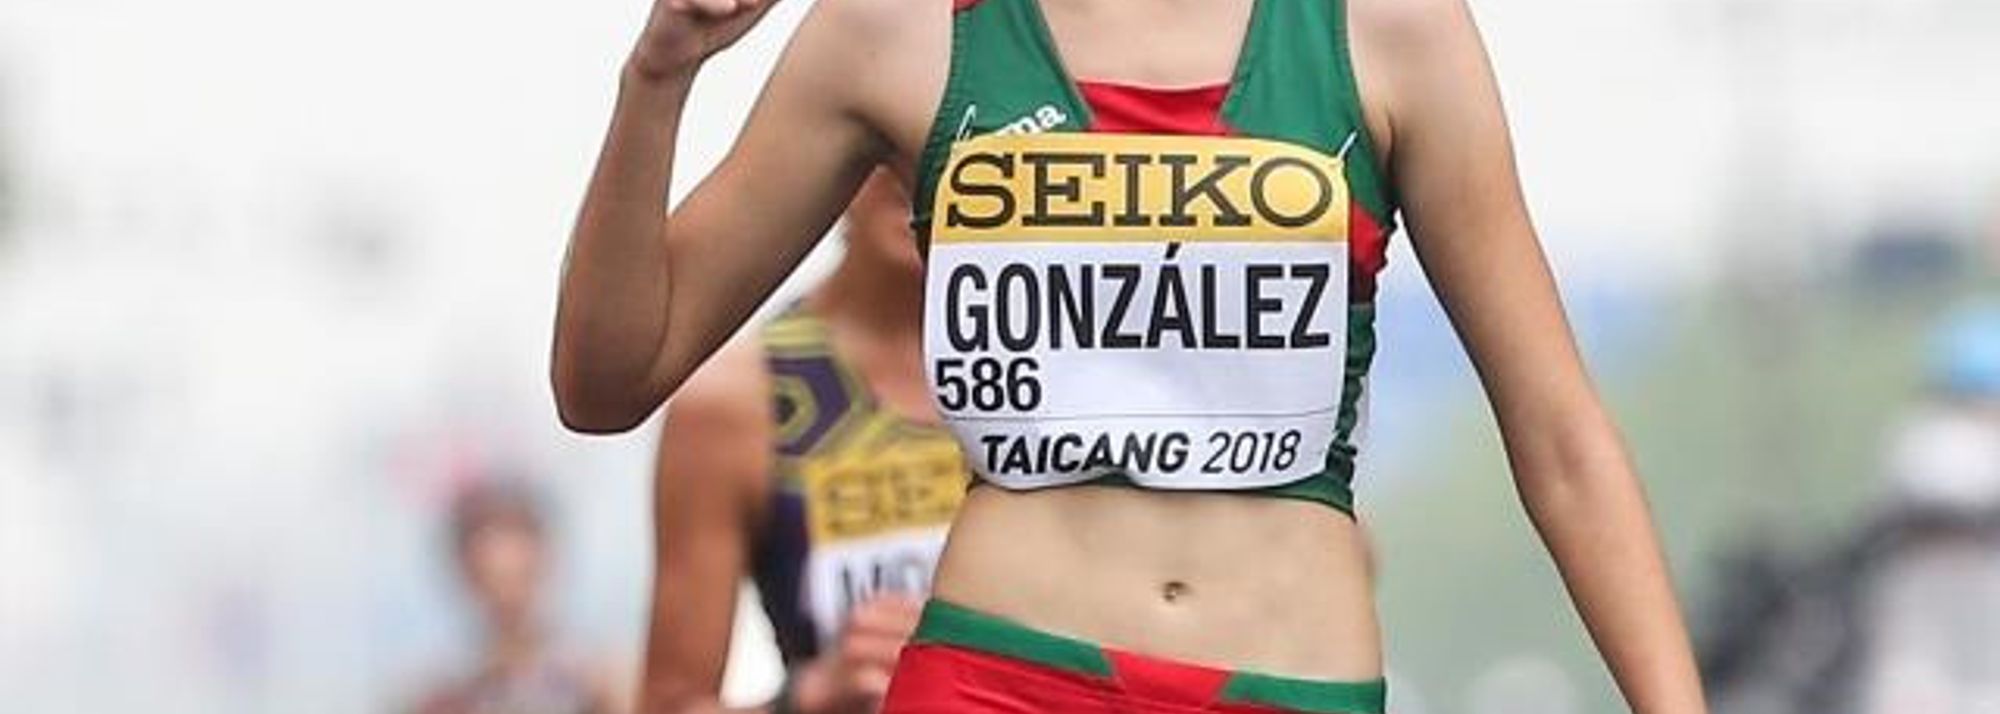 The U20 women’s 10km race walk at the IAAF World Race Walking Team Championships Taicang 2018 witnessed a thrilling battle between three athletes on the final two-kilometre loop as Alegna Gonzalez of Mexico bettered her own North American U20 record with 45:08.